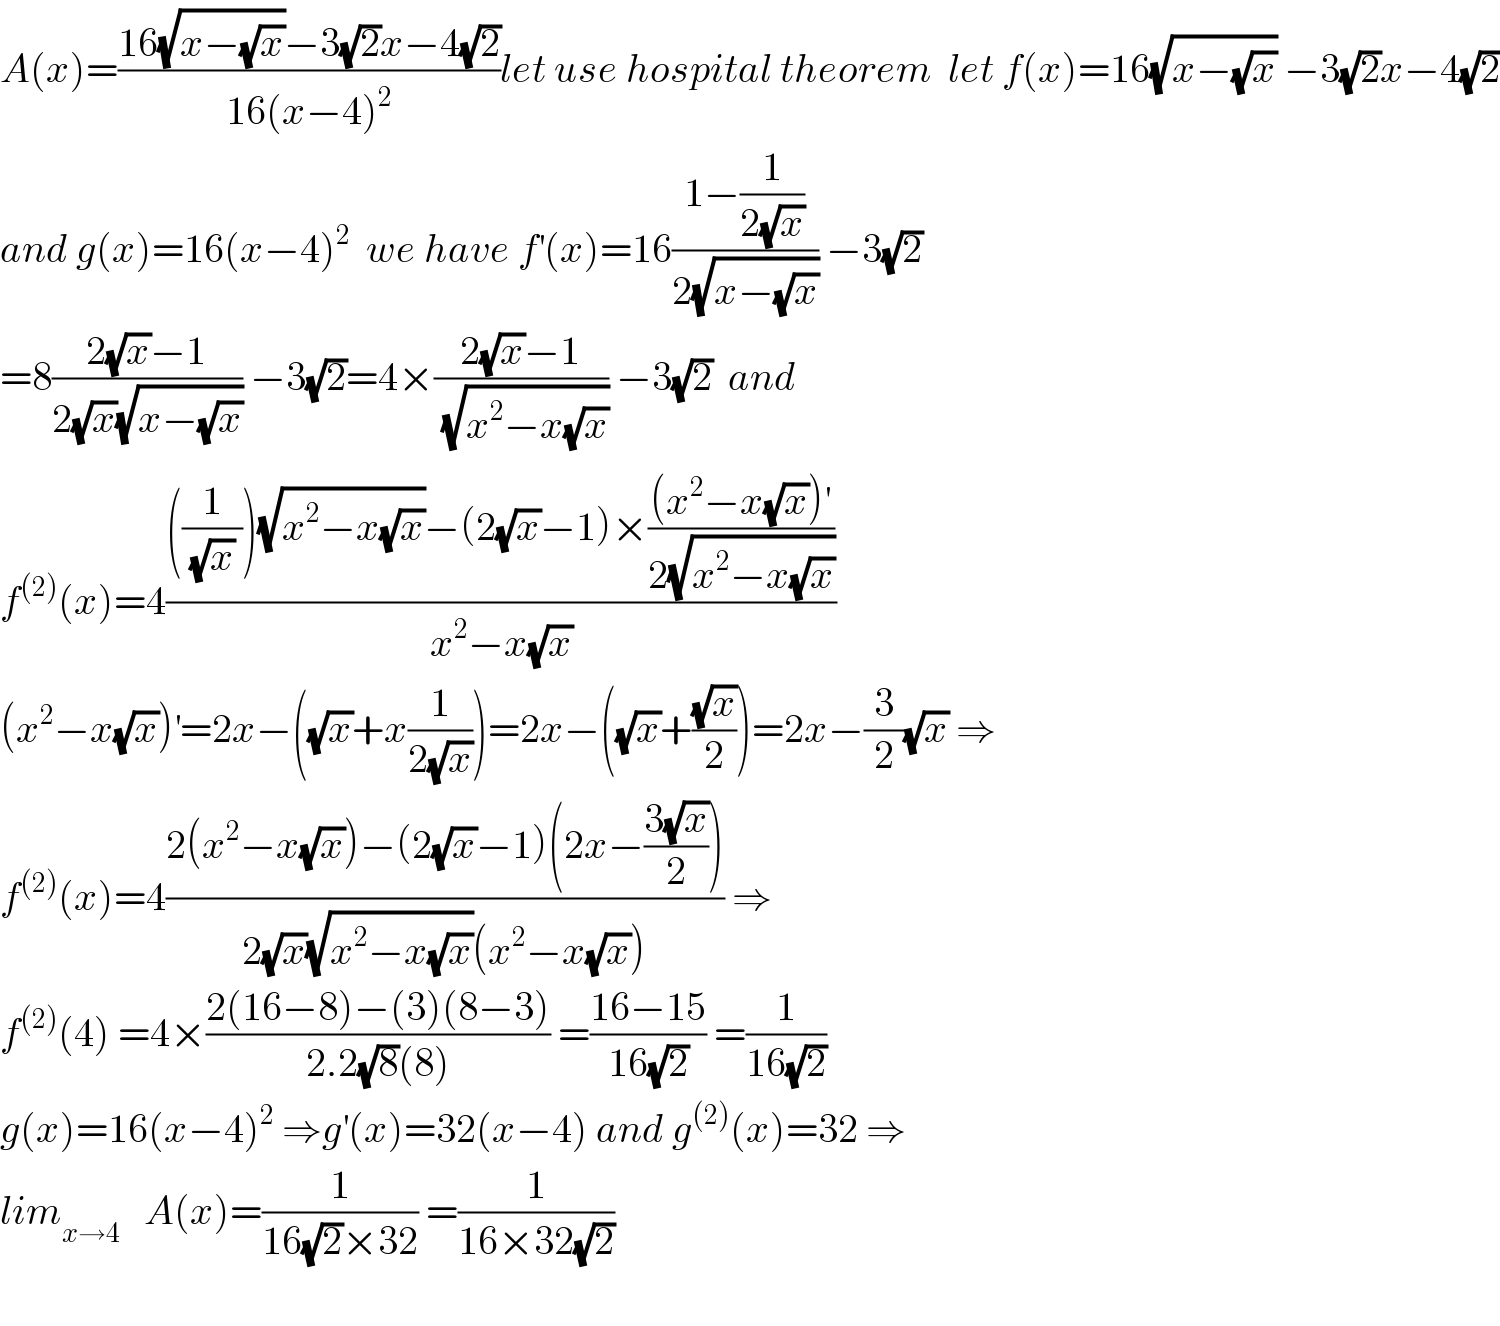 A(x)=((16(√(x−(√x)))−3(√2)x−4(√2))/(16(x−4)^2 ))let use hospital theorem  let f(x)=16(√(x−(√x))) −3(√2)x−4(√2)  and g(x)=16(x−4)^2   we have f^′ (x)=16((1−(1/(2(√x))))/(2(√(x−(√x))))) −3(√2)  =8((2(√x)−1)/(2(√x)(√(x−(√x))))) −3(√2)=4×((2(√x)−1)/(√(x^2 −x(√x)))) −3(√2)  and   f^((2)) (x)=4((((1/((√x) )))(√(x^2 −x(√x)))−(2(√x)−1)×(((x^2 −x(√x))^′ )/(2(√(x^2 −x(√x))))))/(x^2 −x(√x)))  (x^2 −x(√x))^′ =2x−((√x)+x(1/(2(√x))))=2x−((√x)+((√x)/2))=2x−(3/2)(√x) ⇒  f^((2)) (x)=4((2(x^2 −x(√x))−(2(√x)−1)(2x−((3(√x))/2)))/(2(√x)(√(x^2 −x(√x)))(x^2 −x(√x)))) ⇒  f^((2)) (4) =4×((2(16−8)−(3)(8−3))/(2.2(√8)(8))) =((16−15)/(16(√2))) =(1/(16(√2)))  g(x)=16(x−4)^2  ⇒g^′ (x)=32(x−4) and g^((2)) (x)=32 ⇒  lim_(x→4)    A(x)=(1/(16(√2)×32)) =(1/(16×32(√2)))    